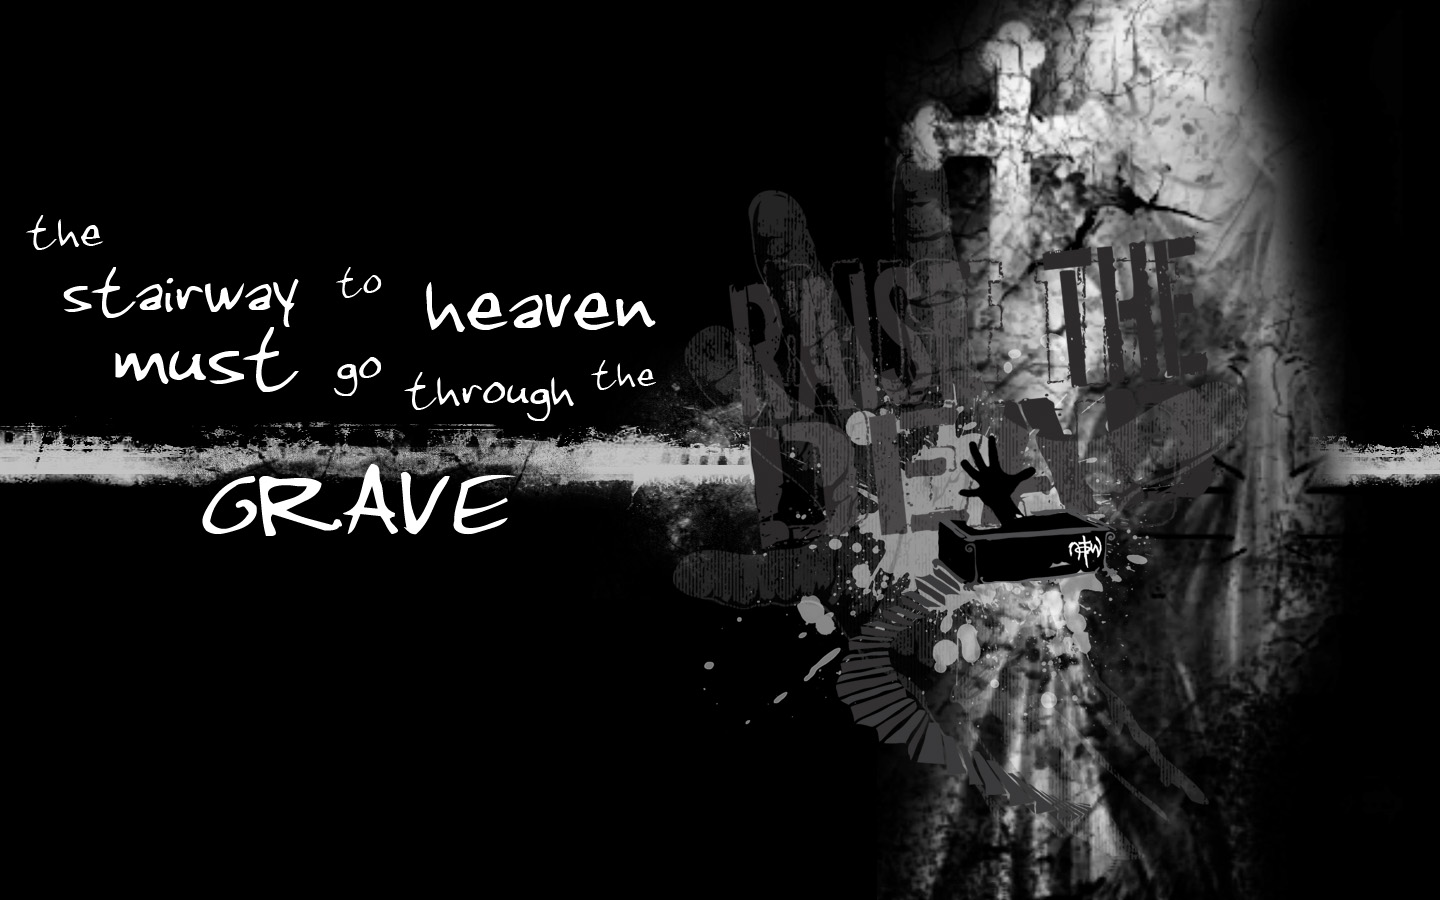 Raise the Dead Wallpaper - Christian Wallpapers and Backgrounds